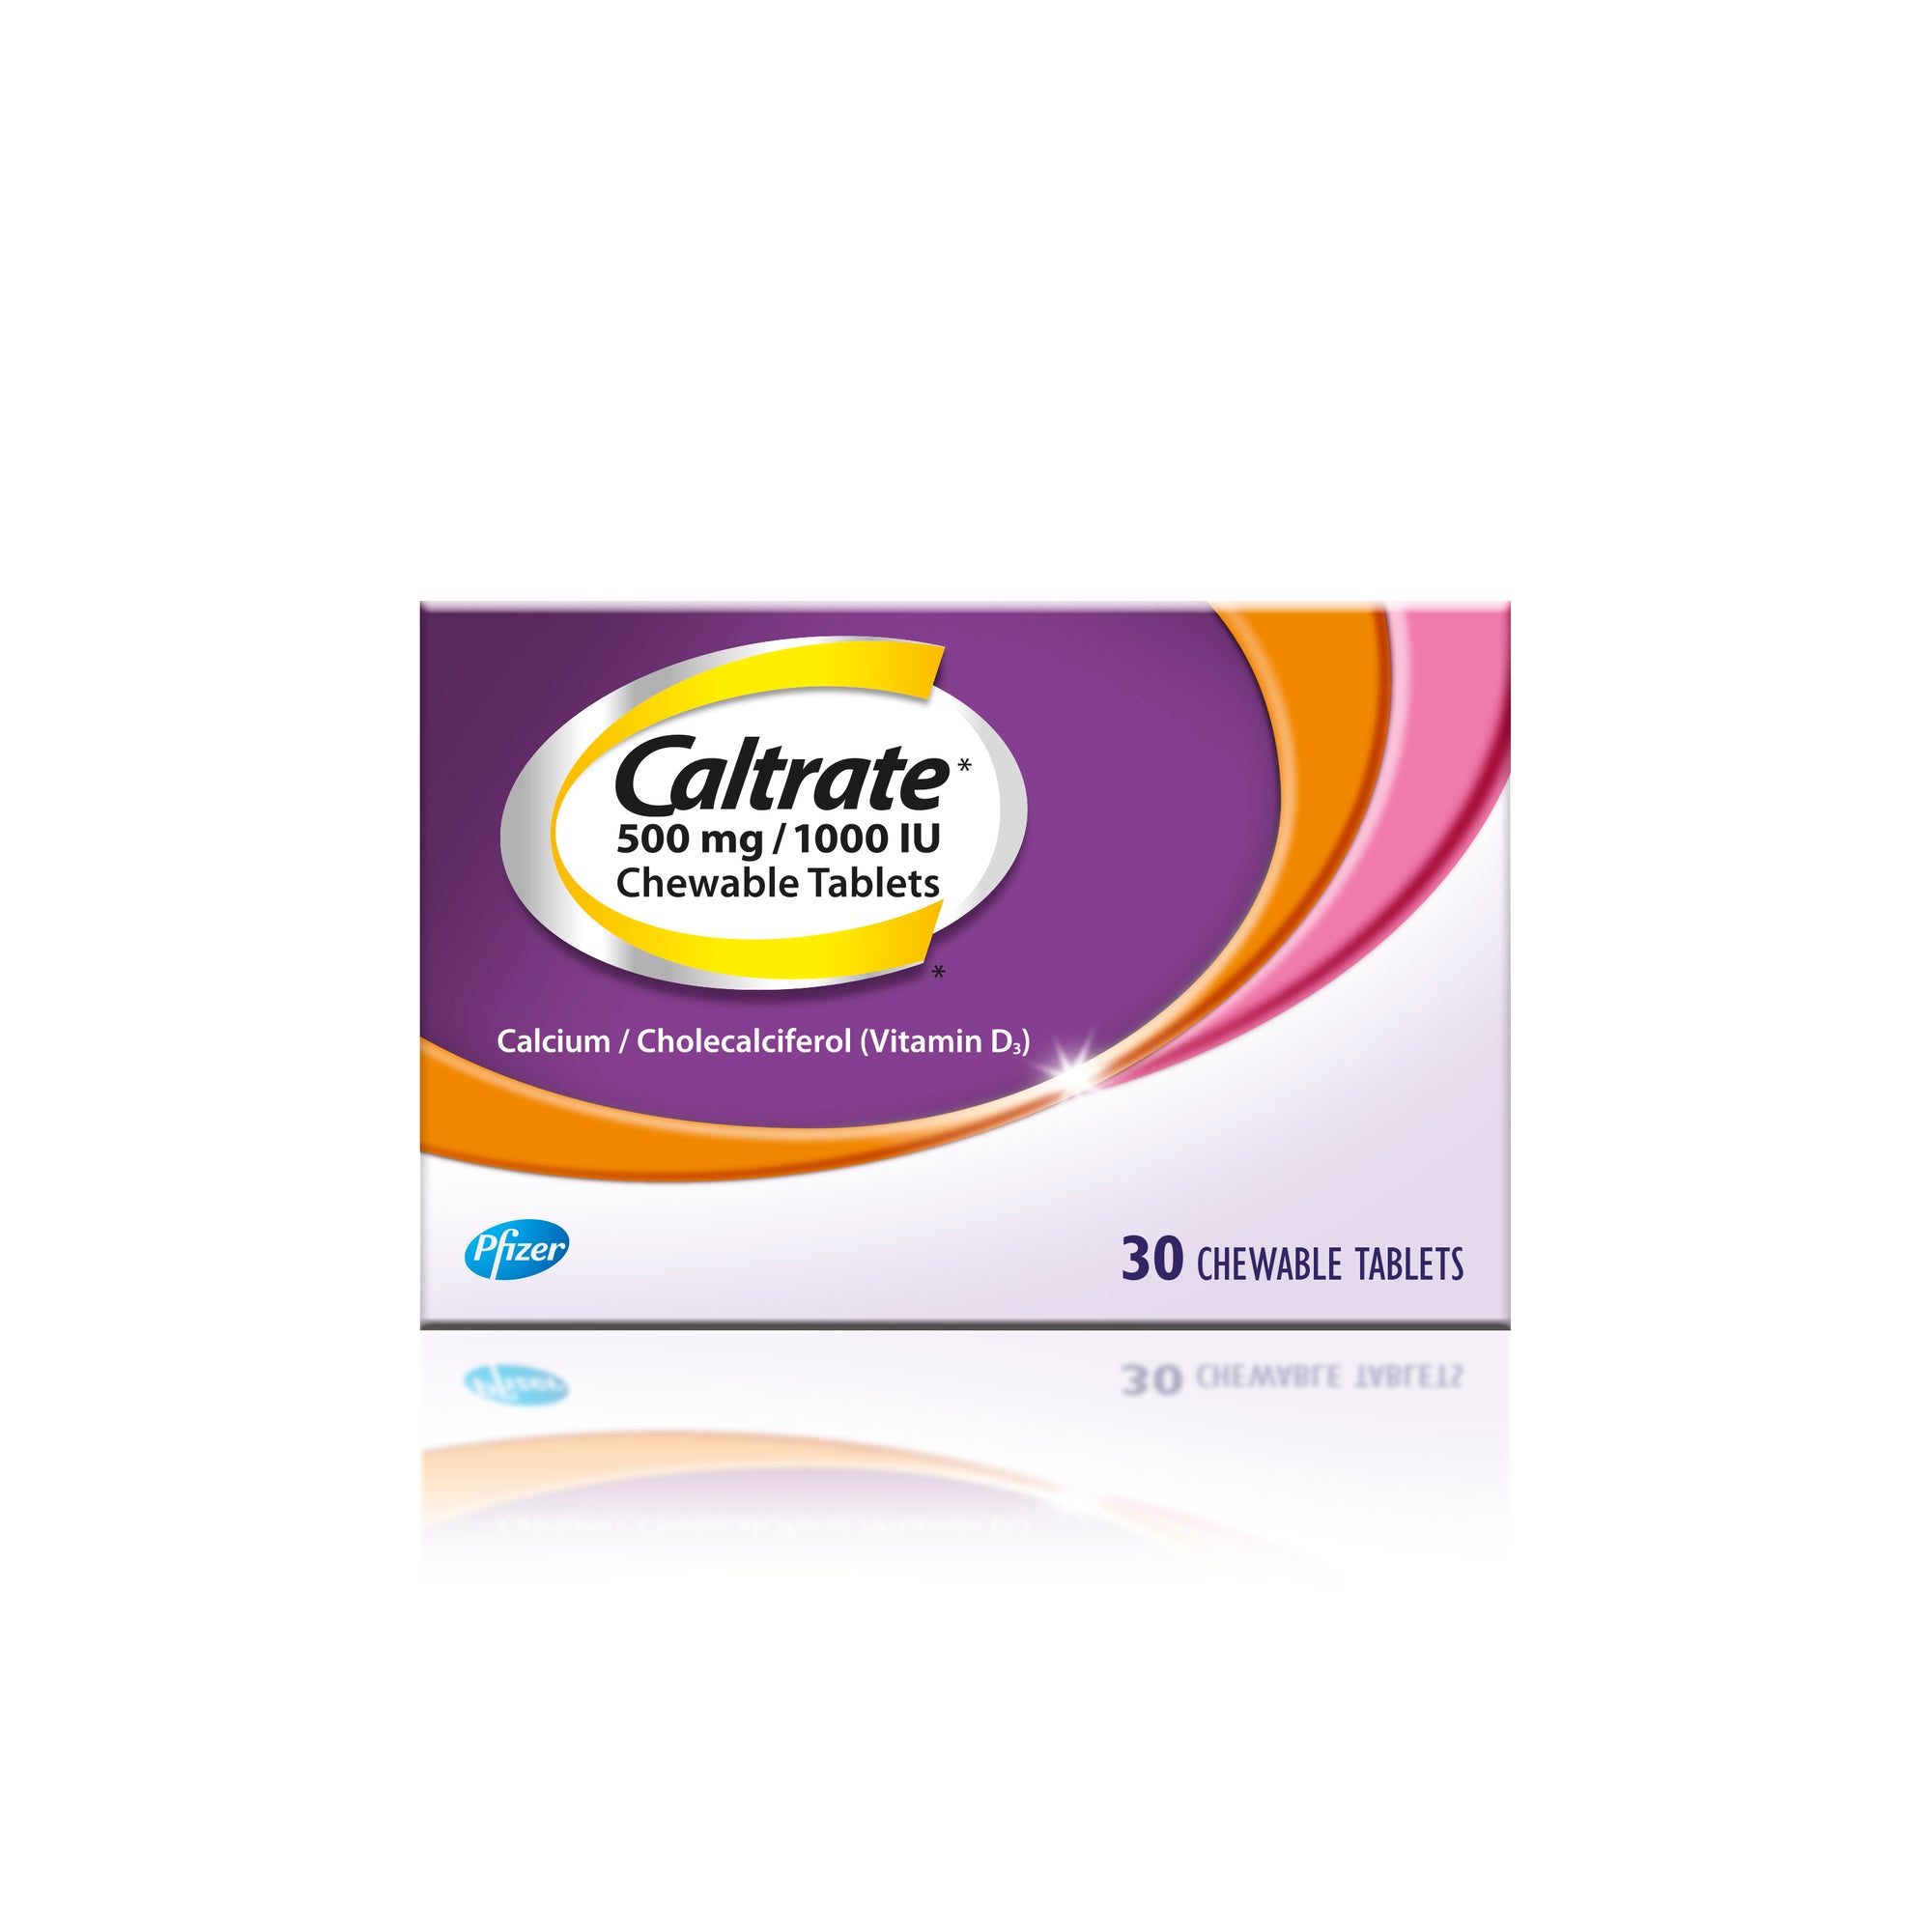 Caltrate 500mg/1000IU Chewable Tablets 30's